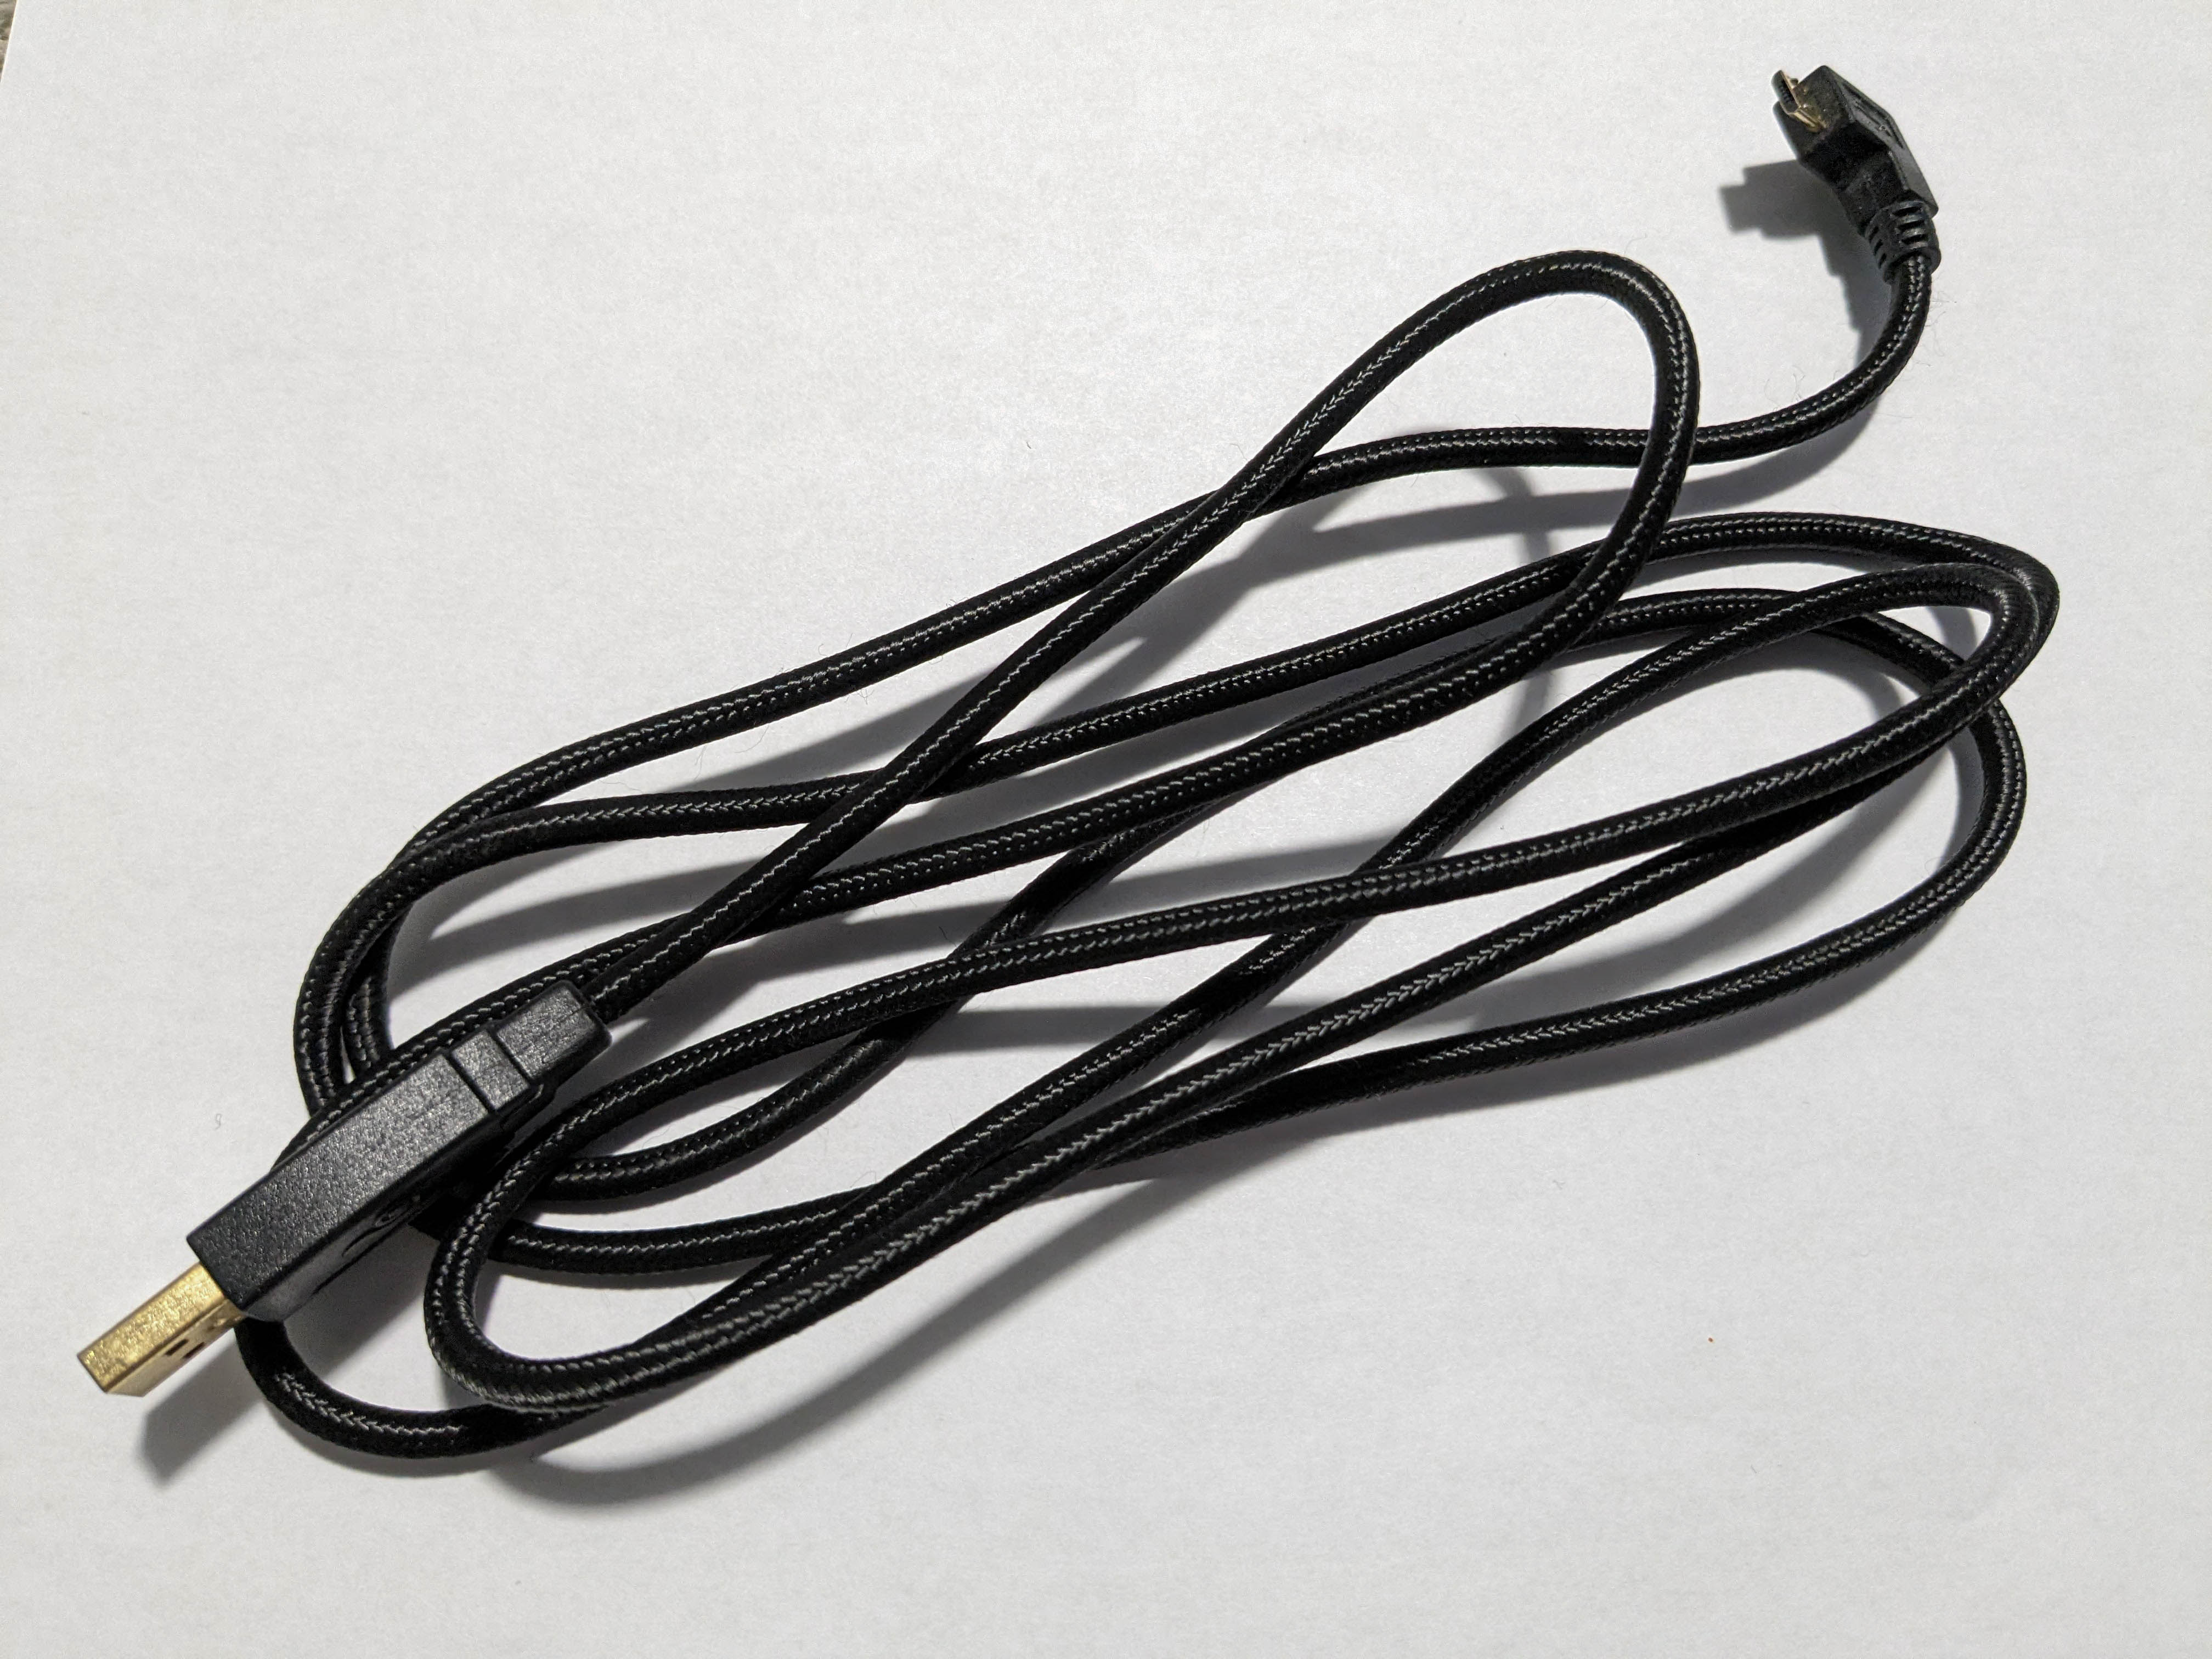 011-nt-stock-cable.jpg